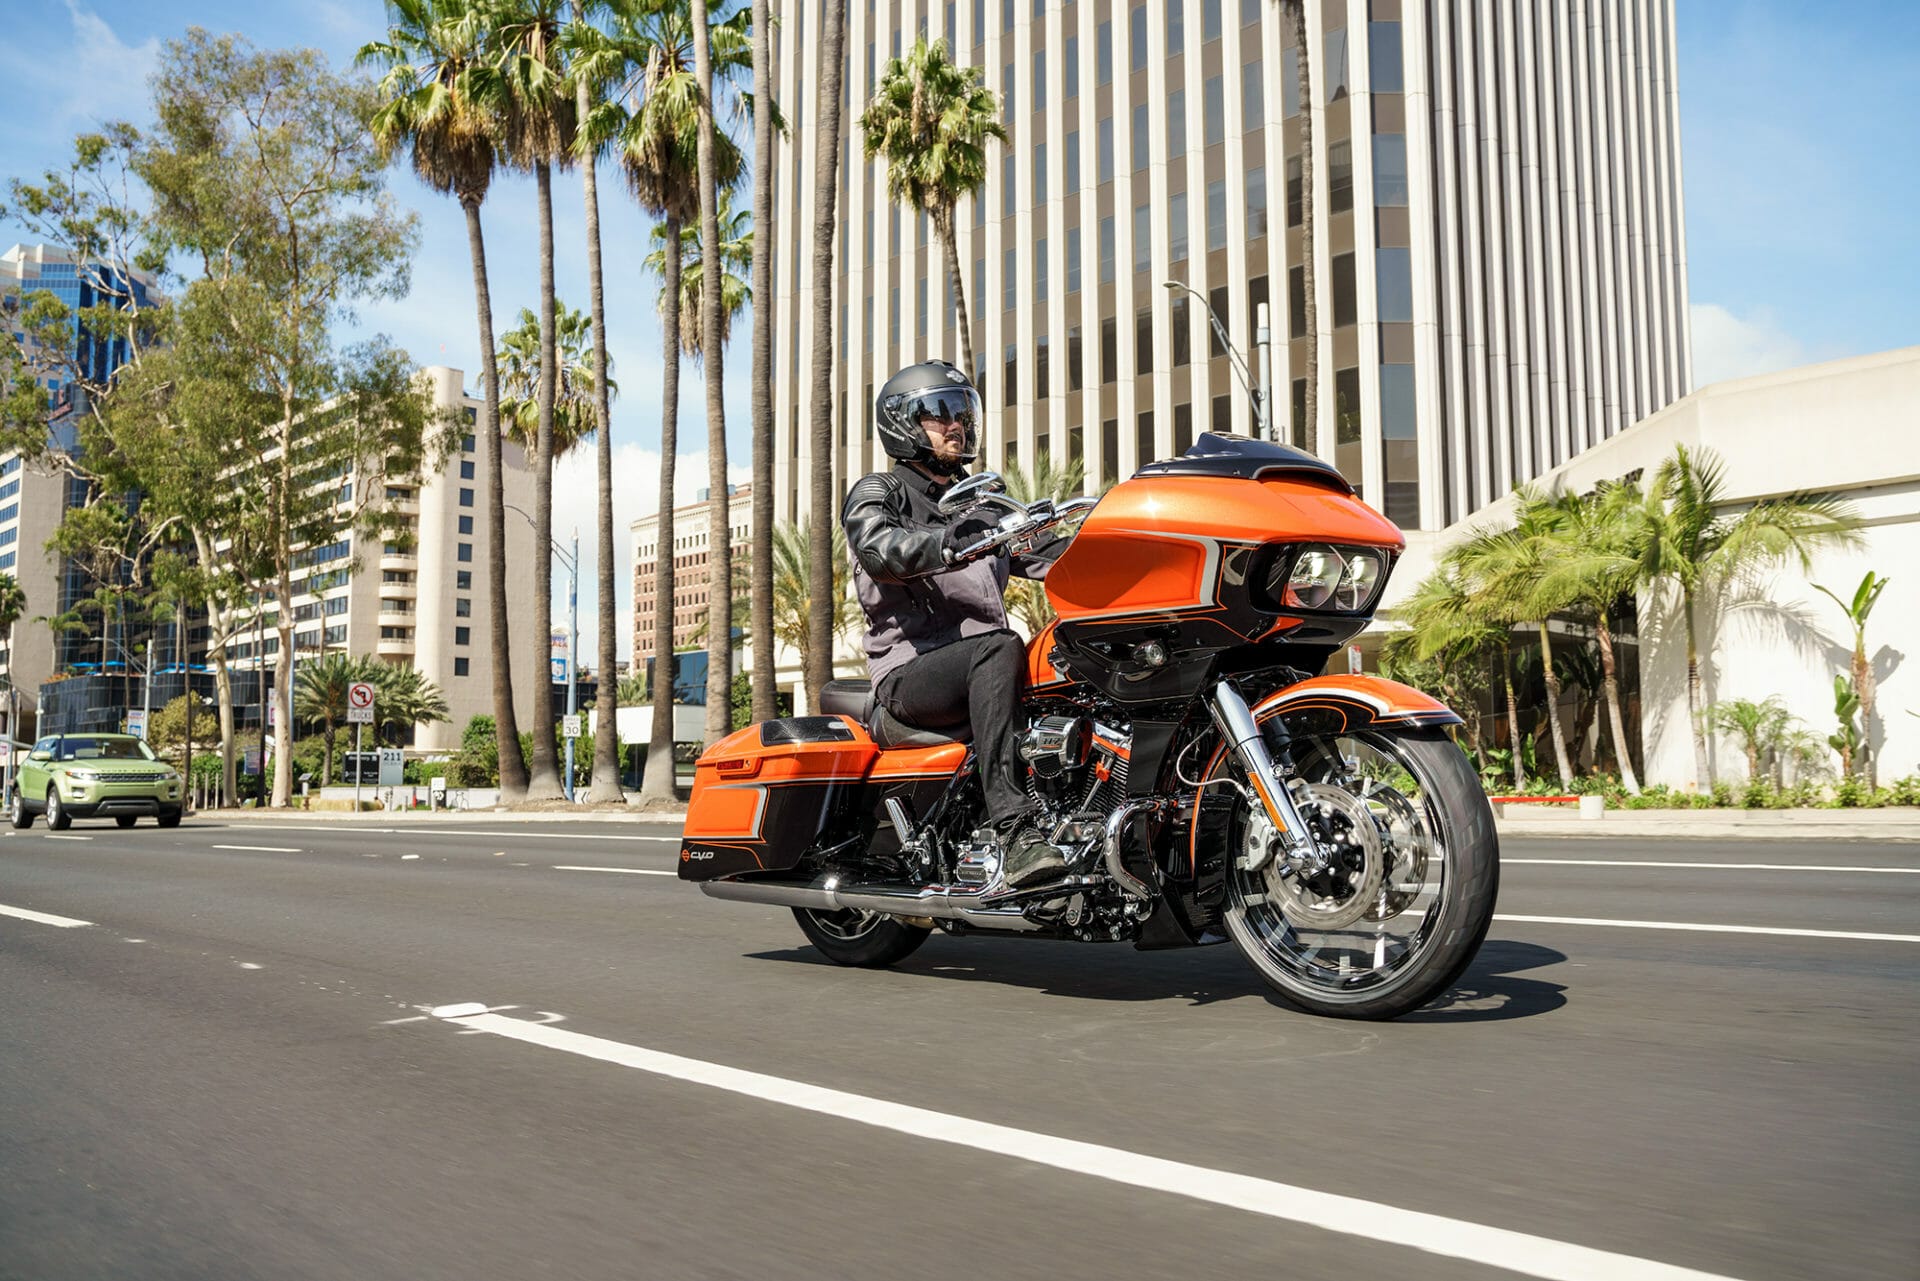 Update of the Harley-Davidson CVO models
- also in the MOTORCYCLES.NEWS APP